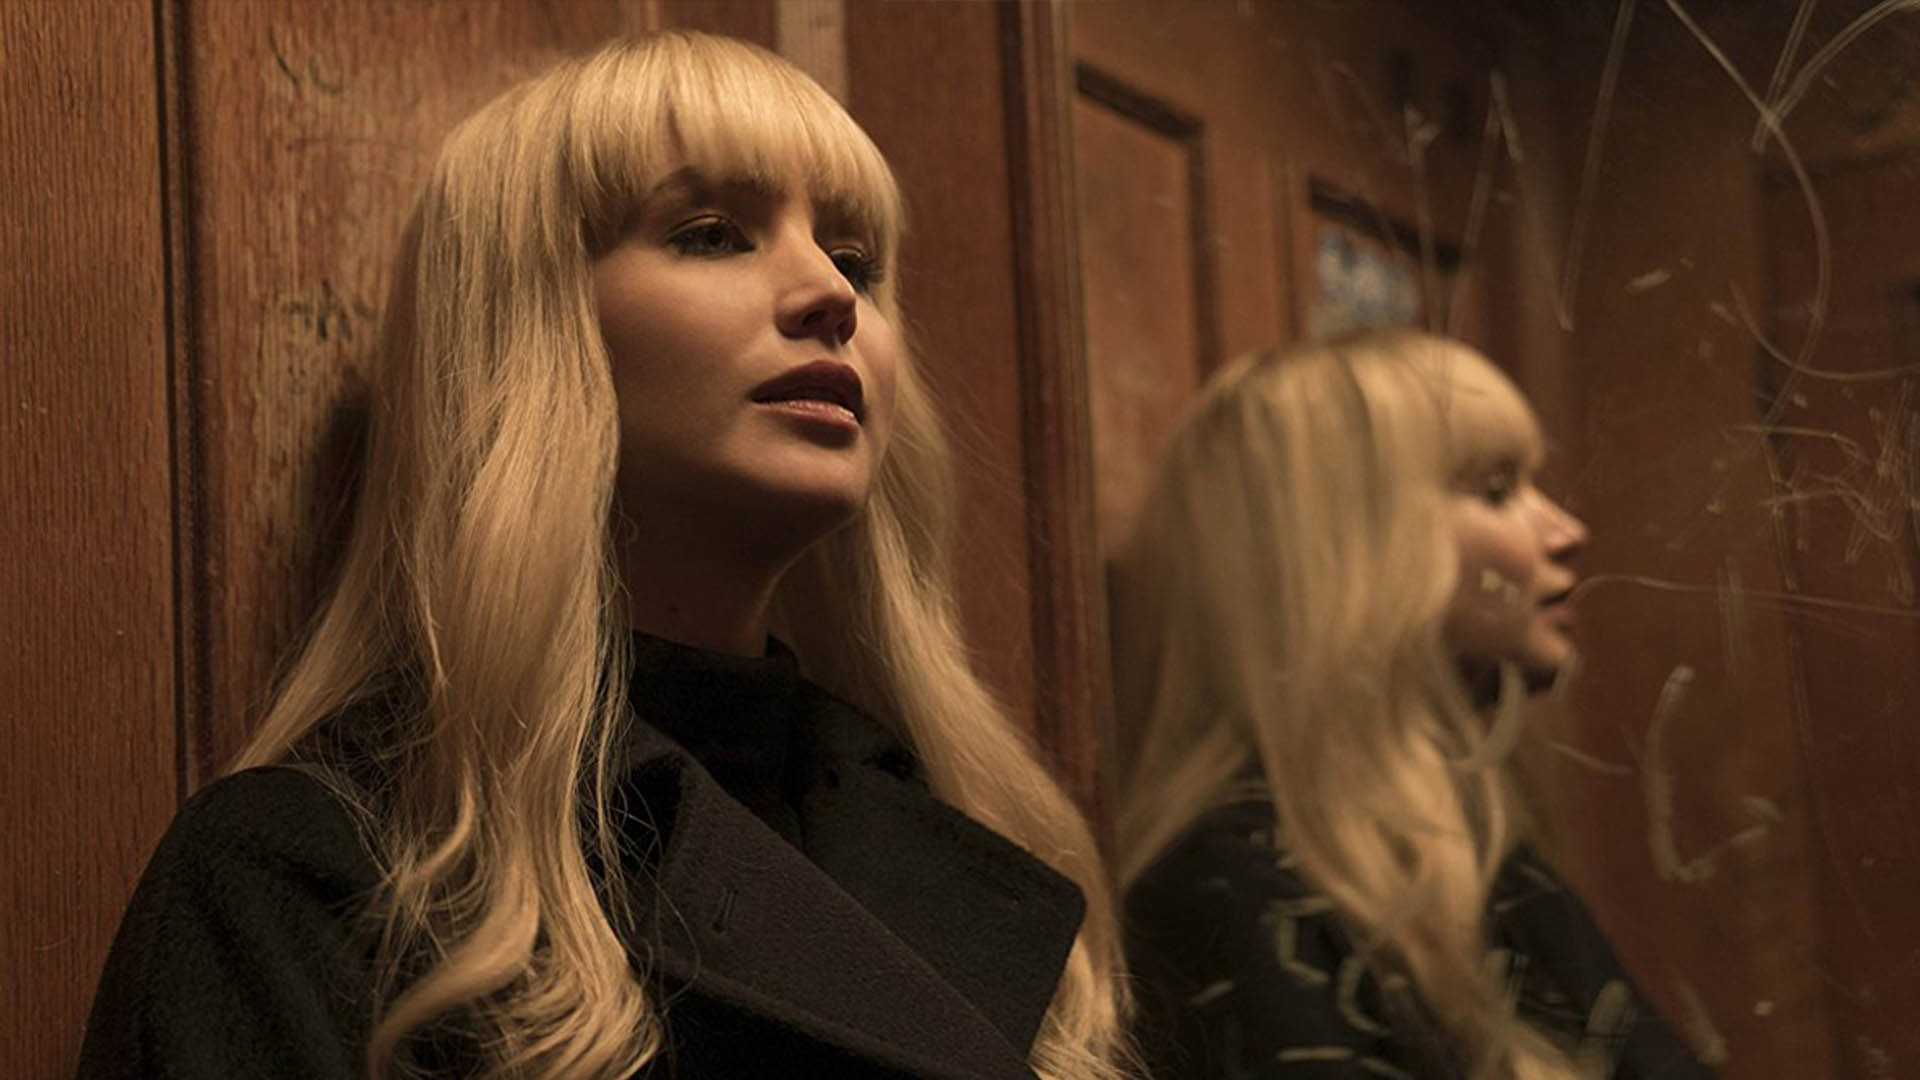 Jennifer Lawrence stands next to a mirror in Red Sparrow